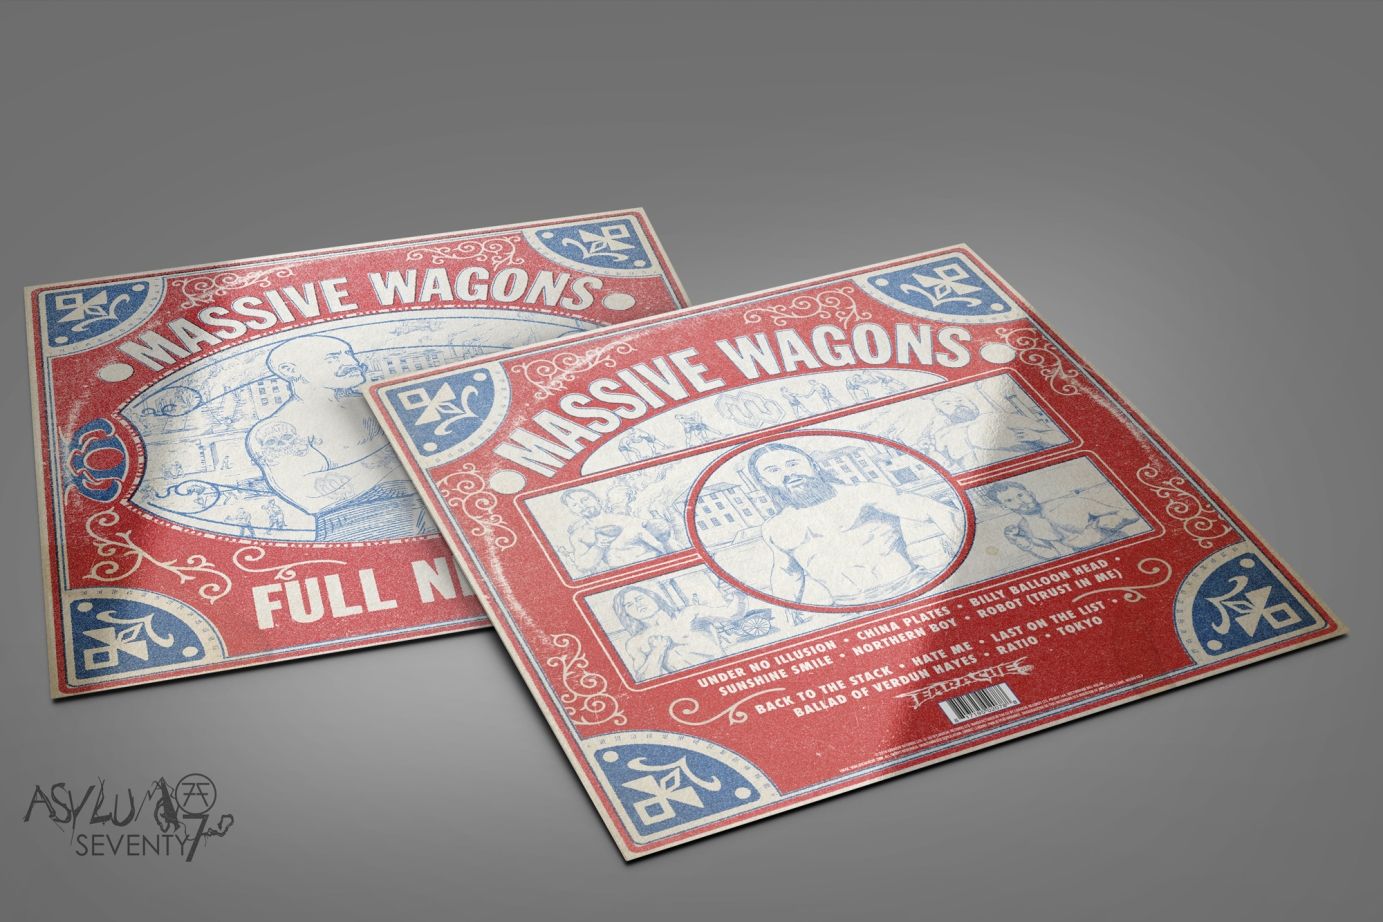 Graphic design for Earache Records, Massive Wagons by ASYLUMseventy7